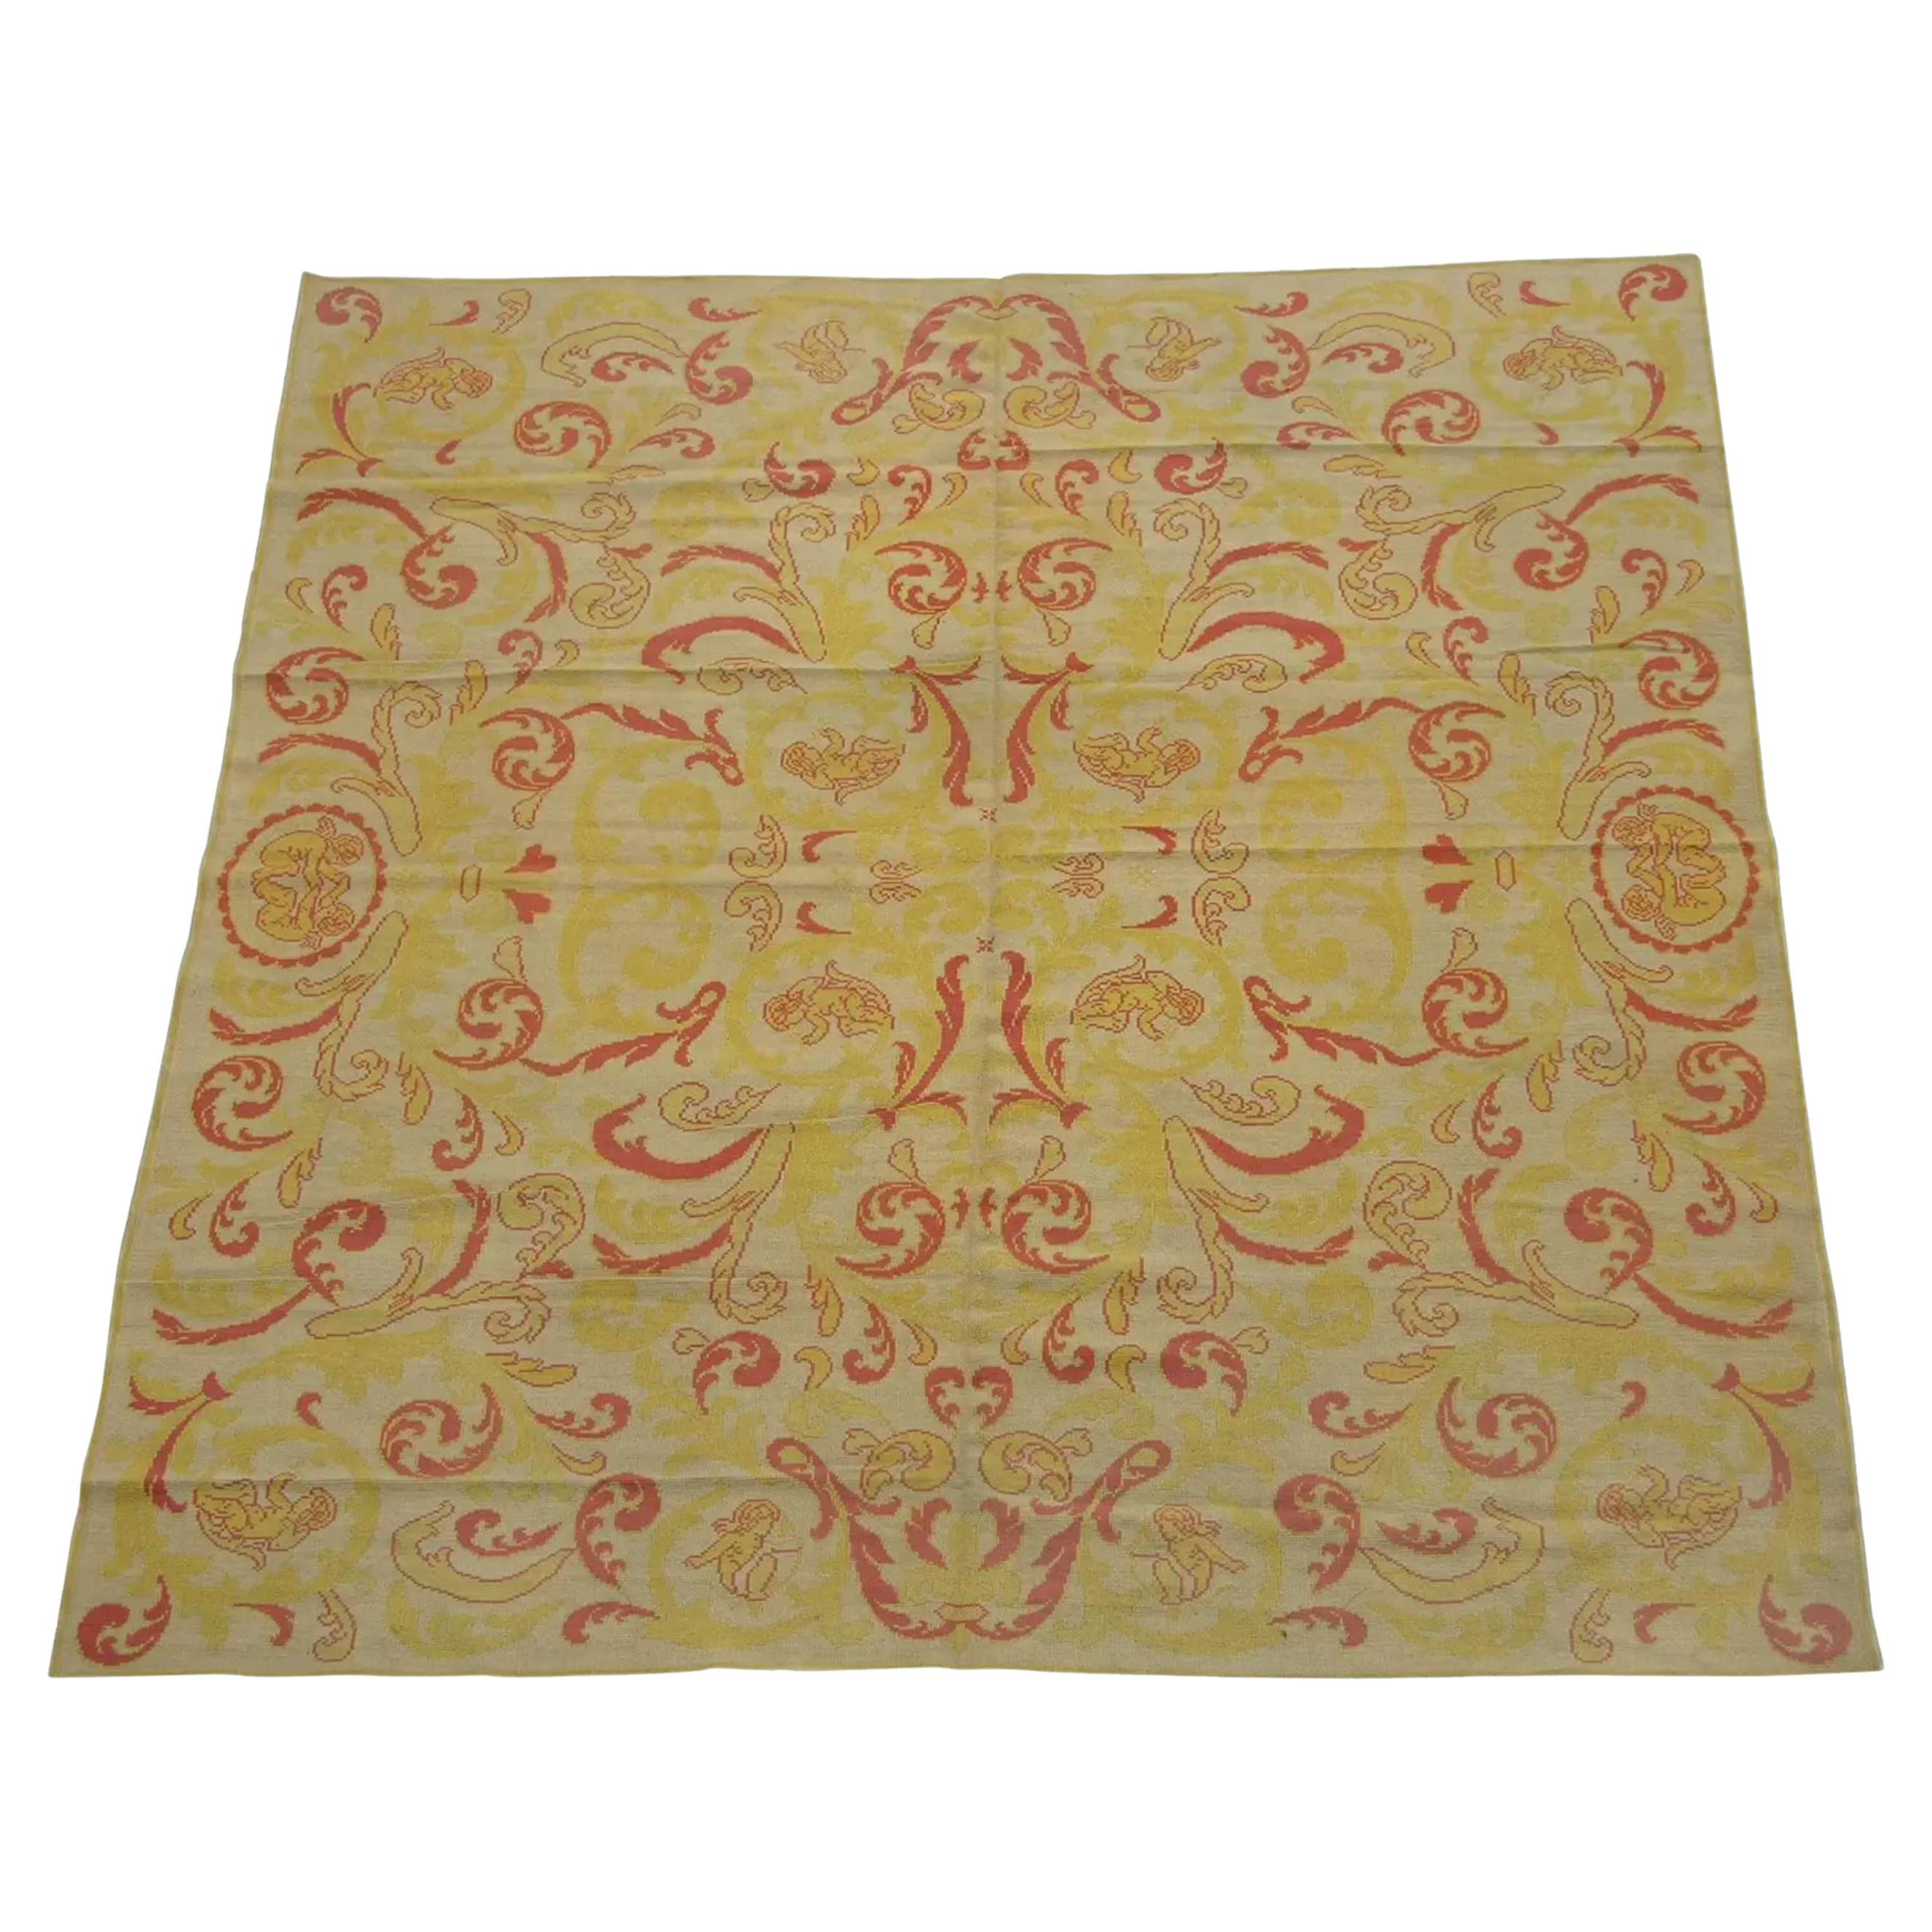 1900 Antique Yellow Abstract Style European Needlework Rug For Sale